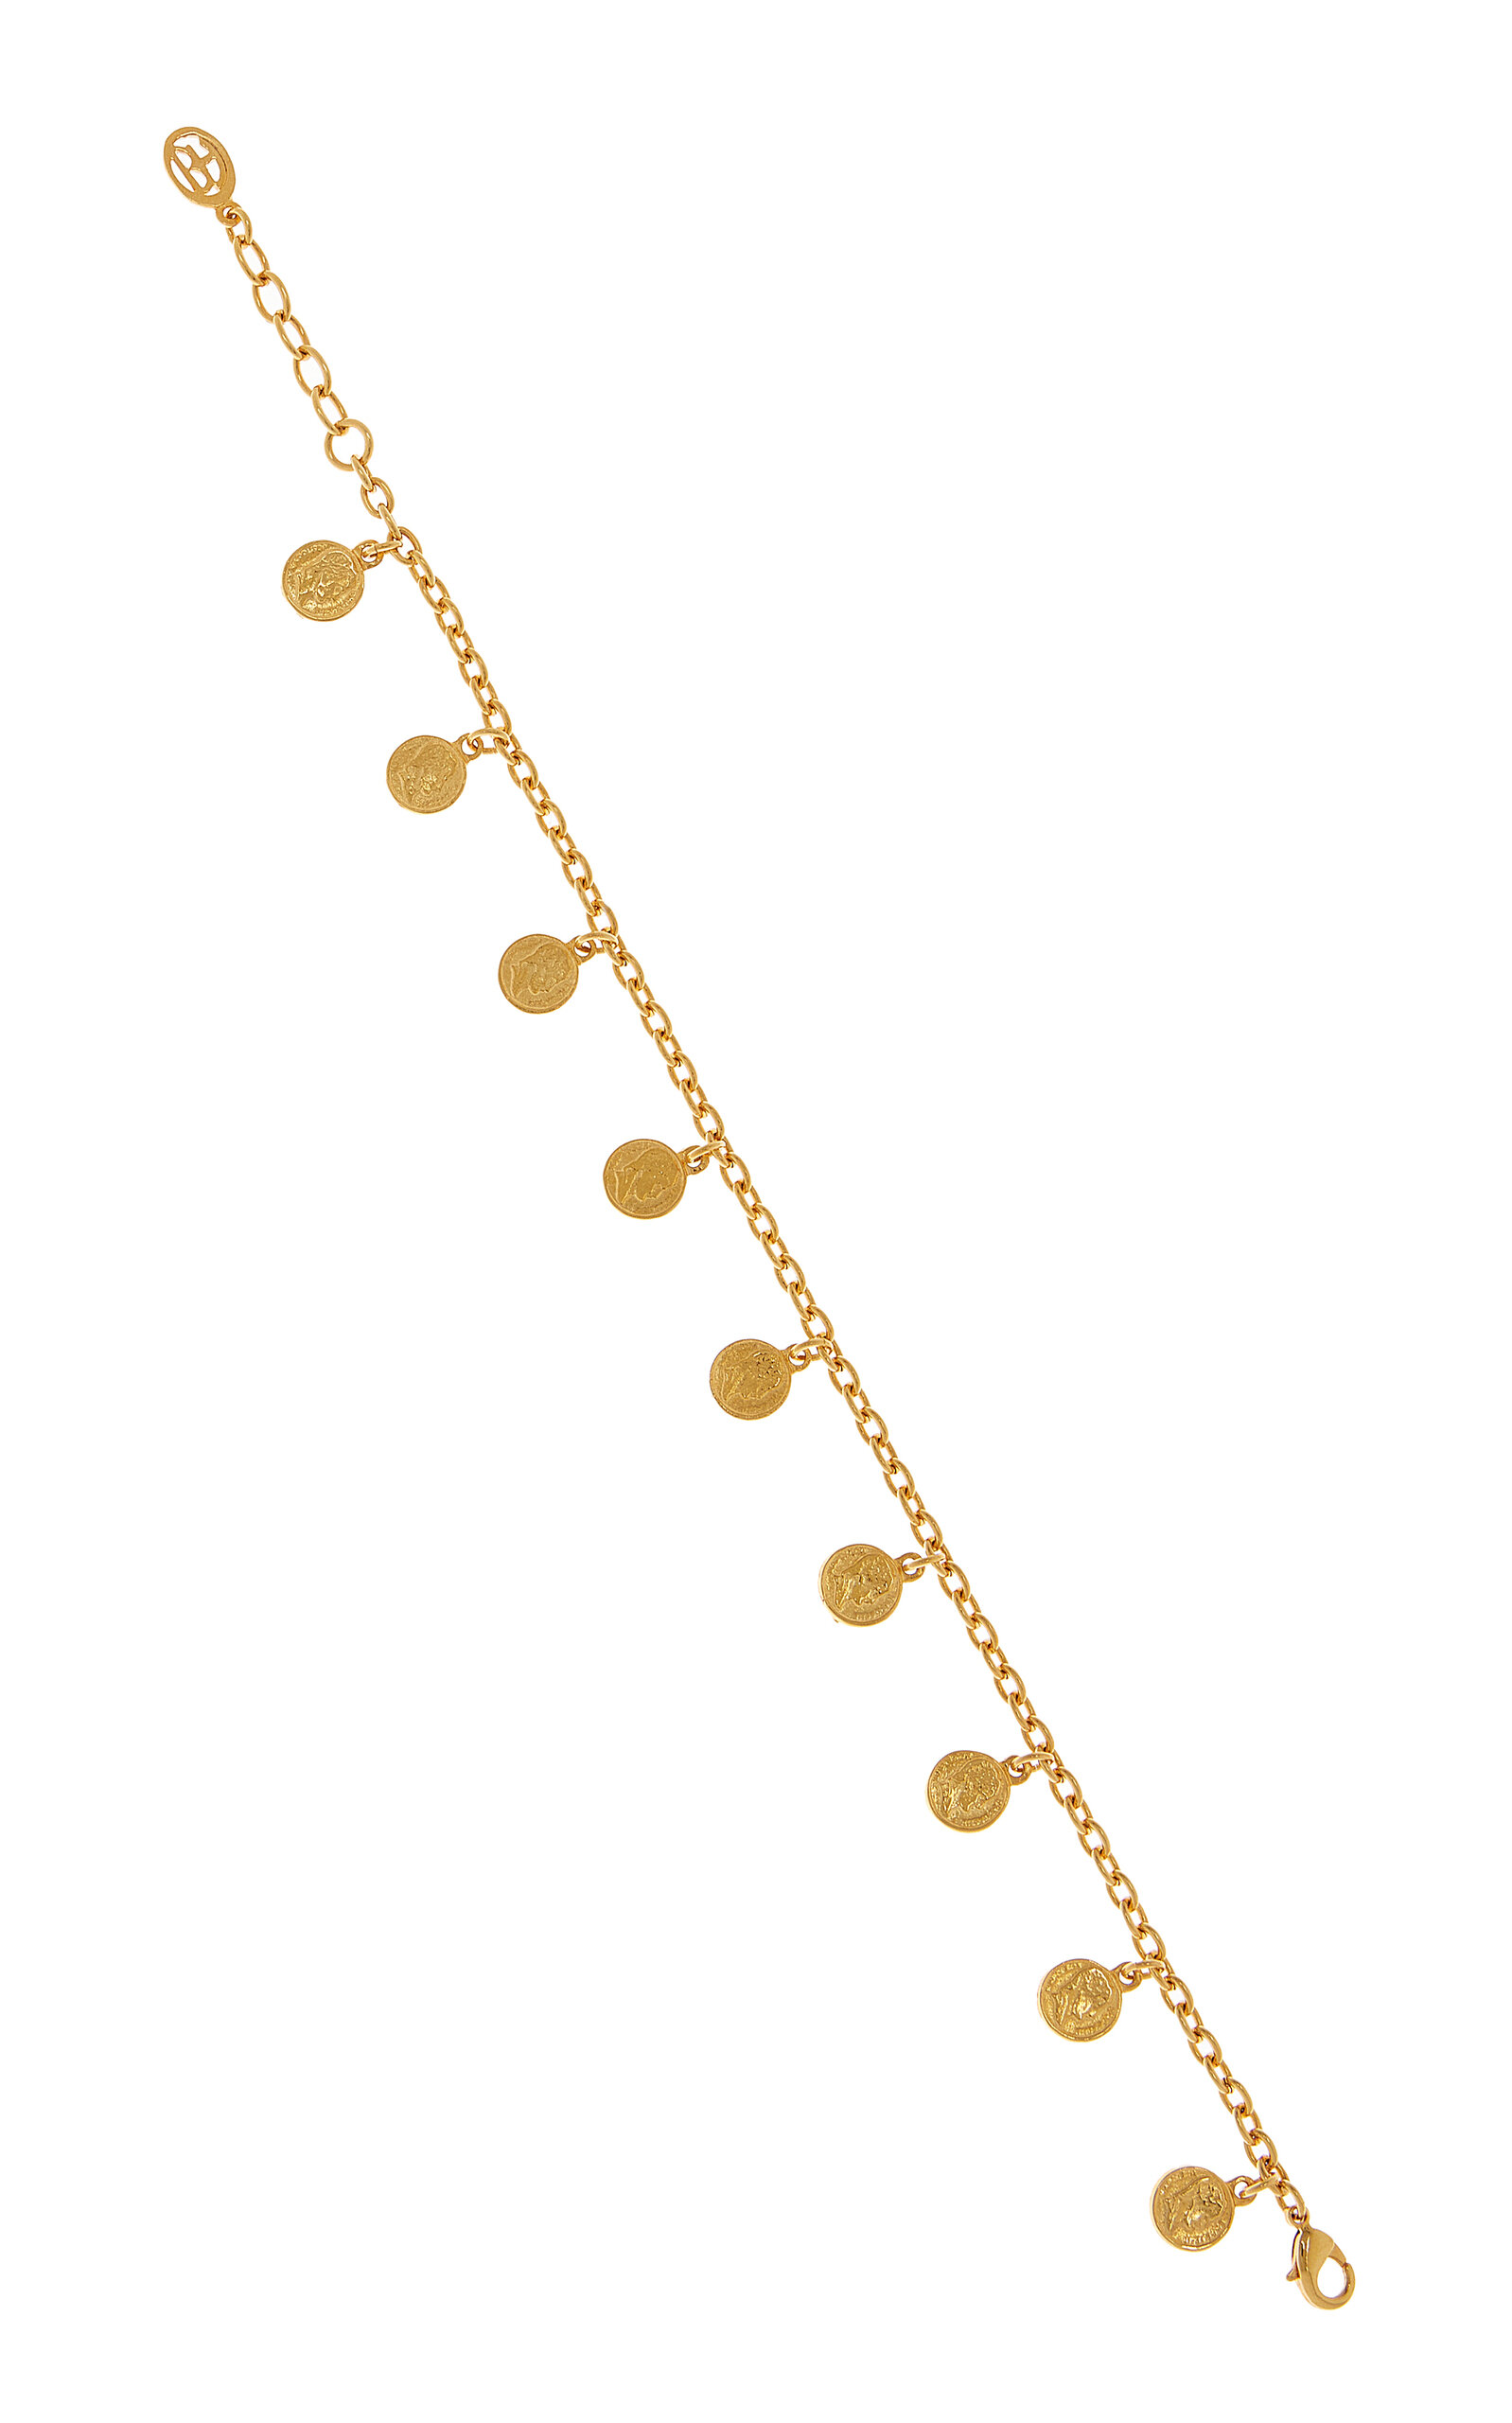 Exclusive 24K Gold-Plated Charm Anklet